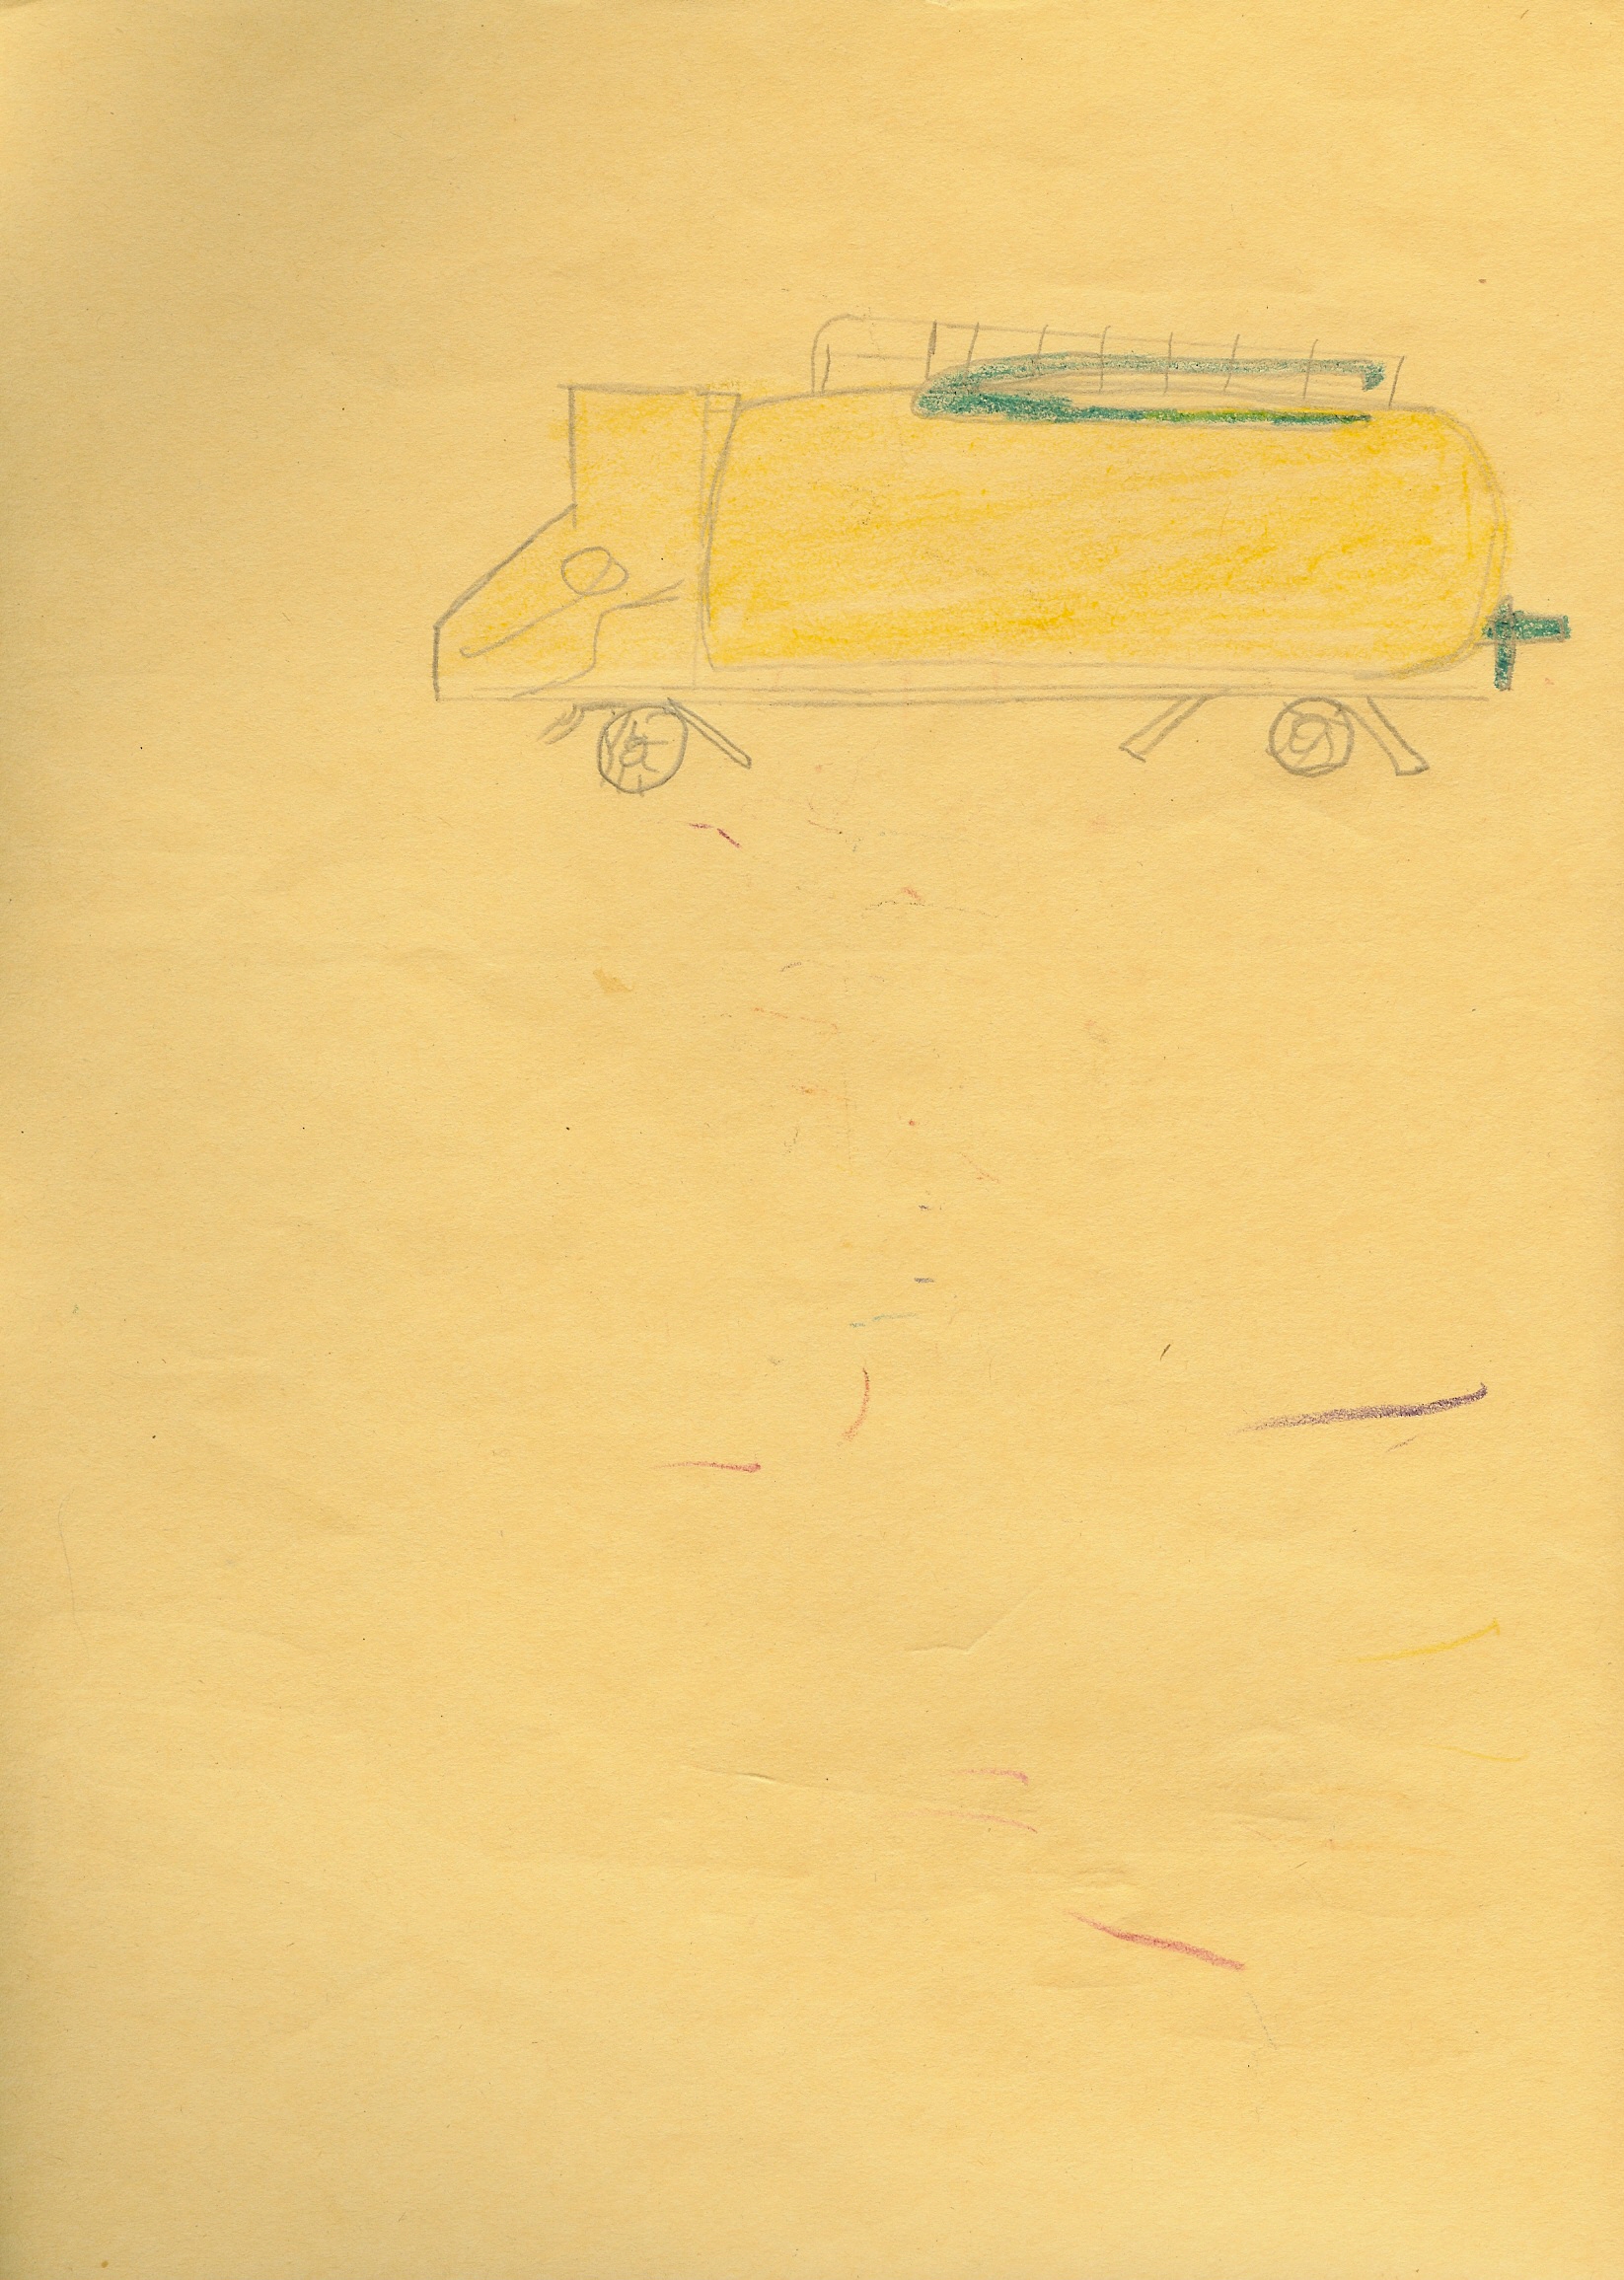 Drawings from Children of Darfur - 